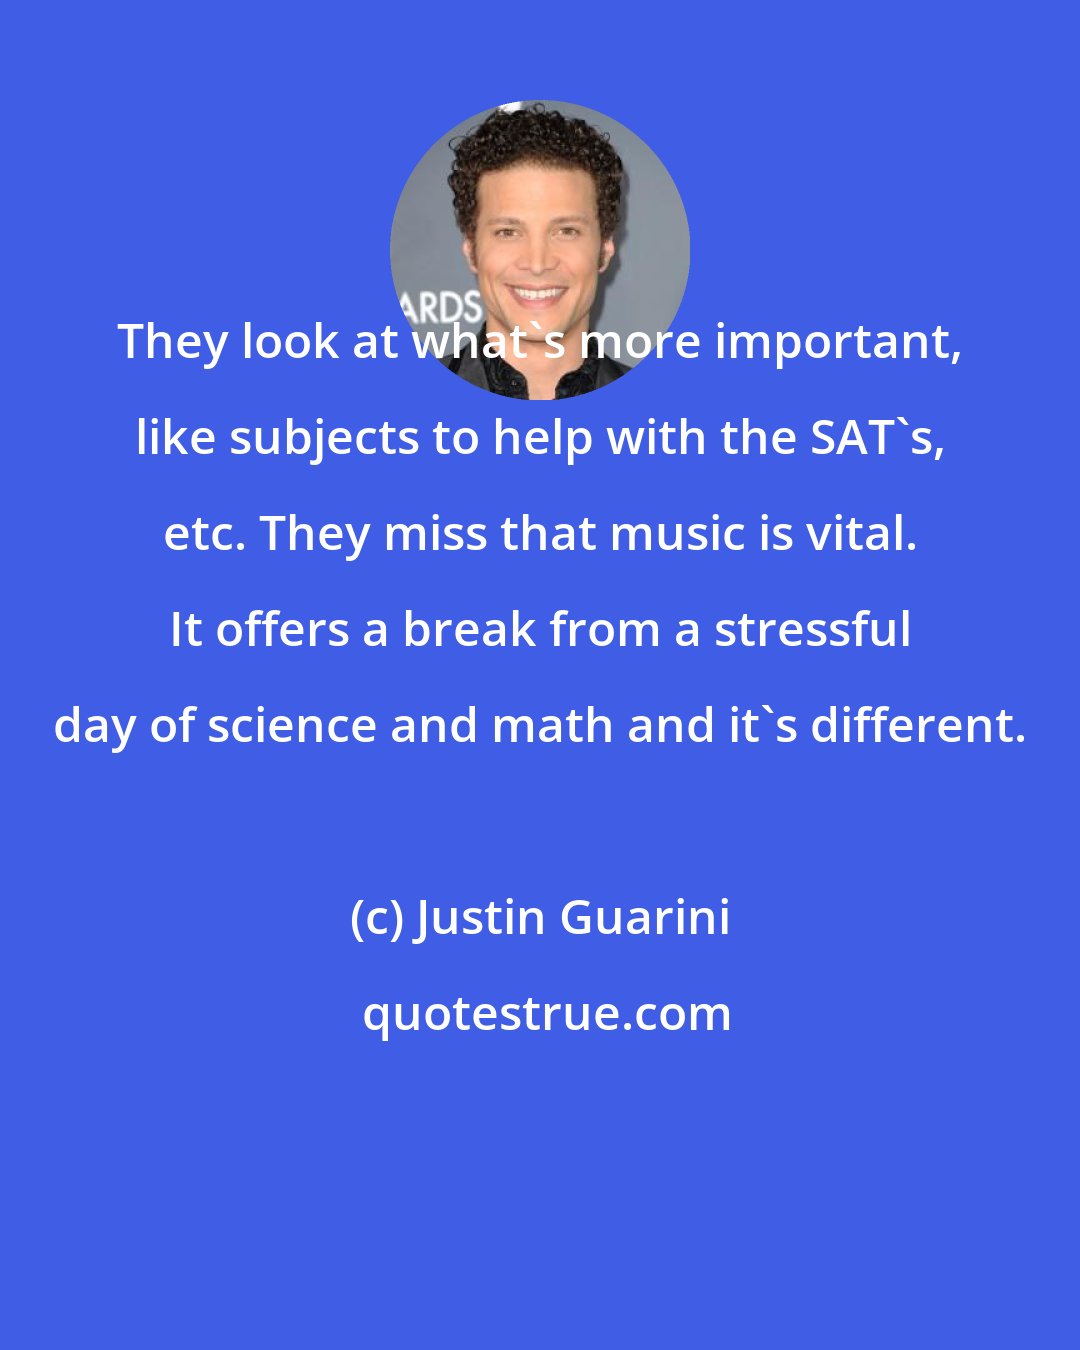 Justin Guarini: They look at what's more important, like subjects to help with the SAT's, etc. They miss that music is vital. It offers a break from a stressful day of science and math and it's different.